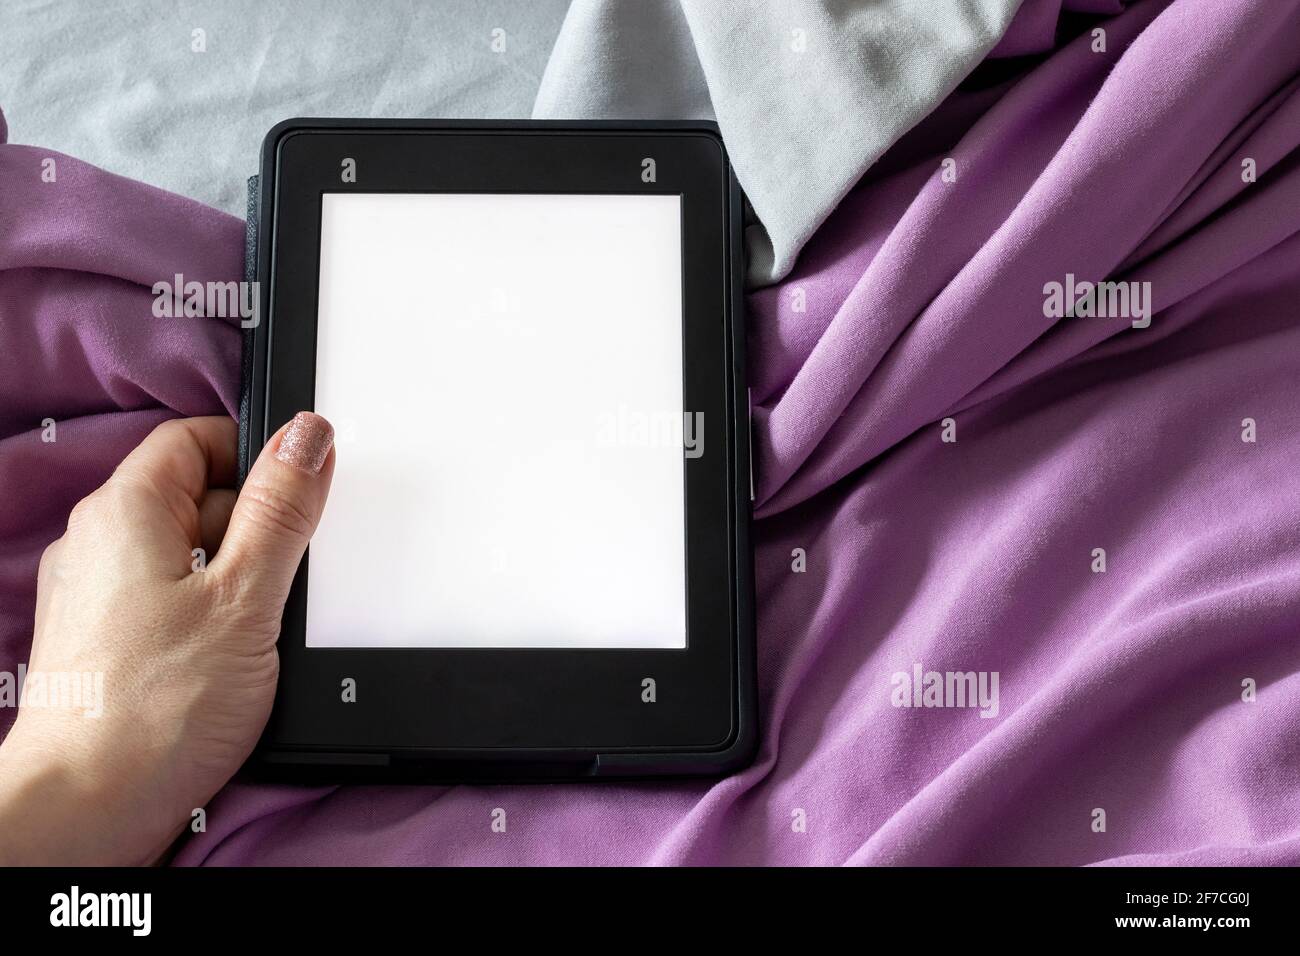 A modern black e-reader electronic book with a blank screen in female hand on a gray and purple bed. Mockup tablet on microfiber bedding closeup Stock Photo